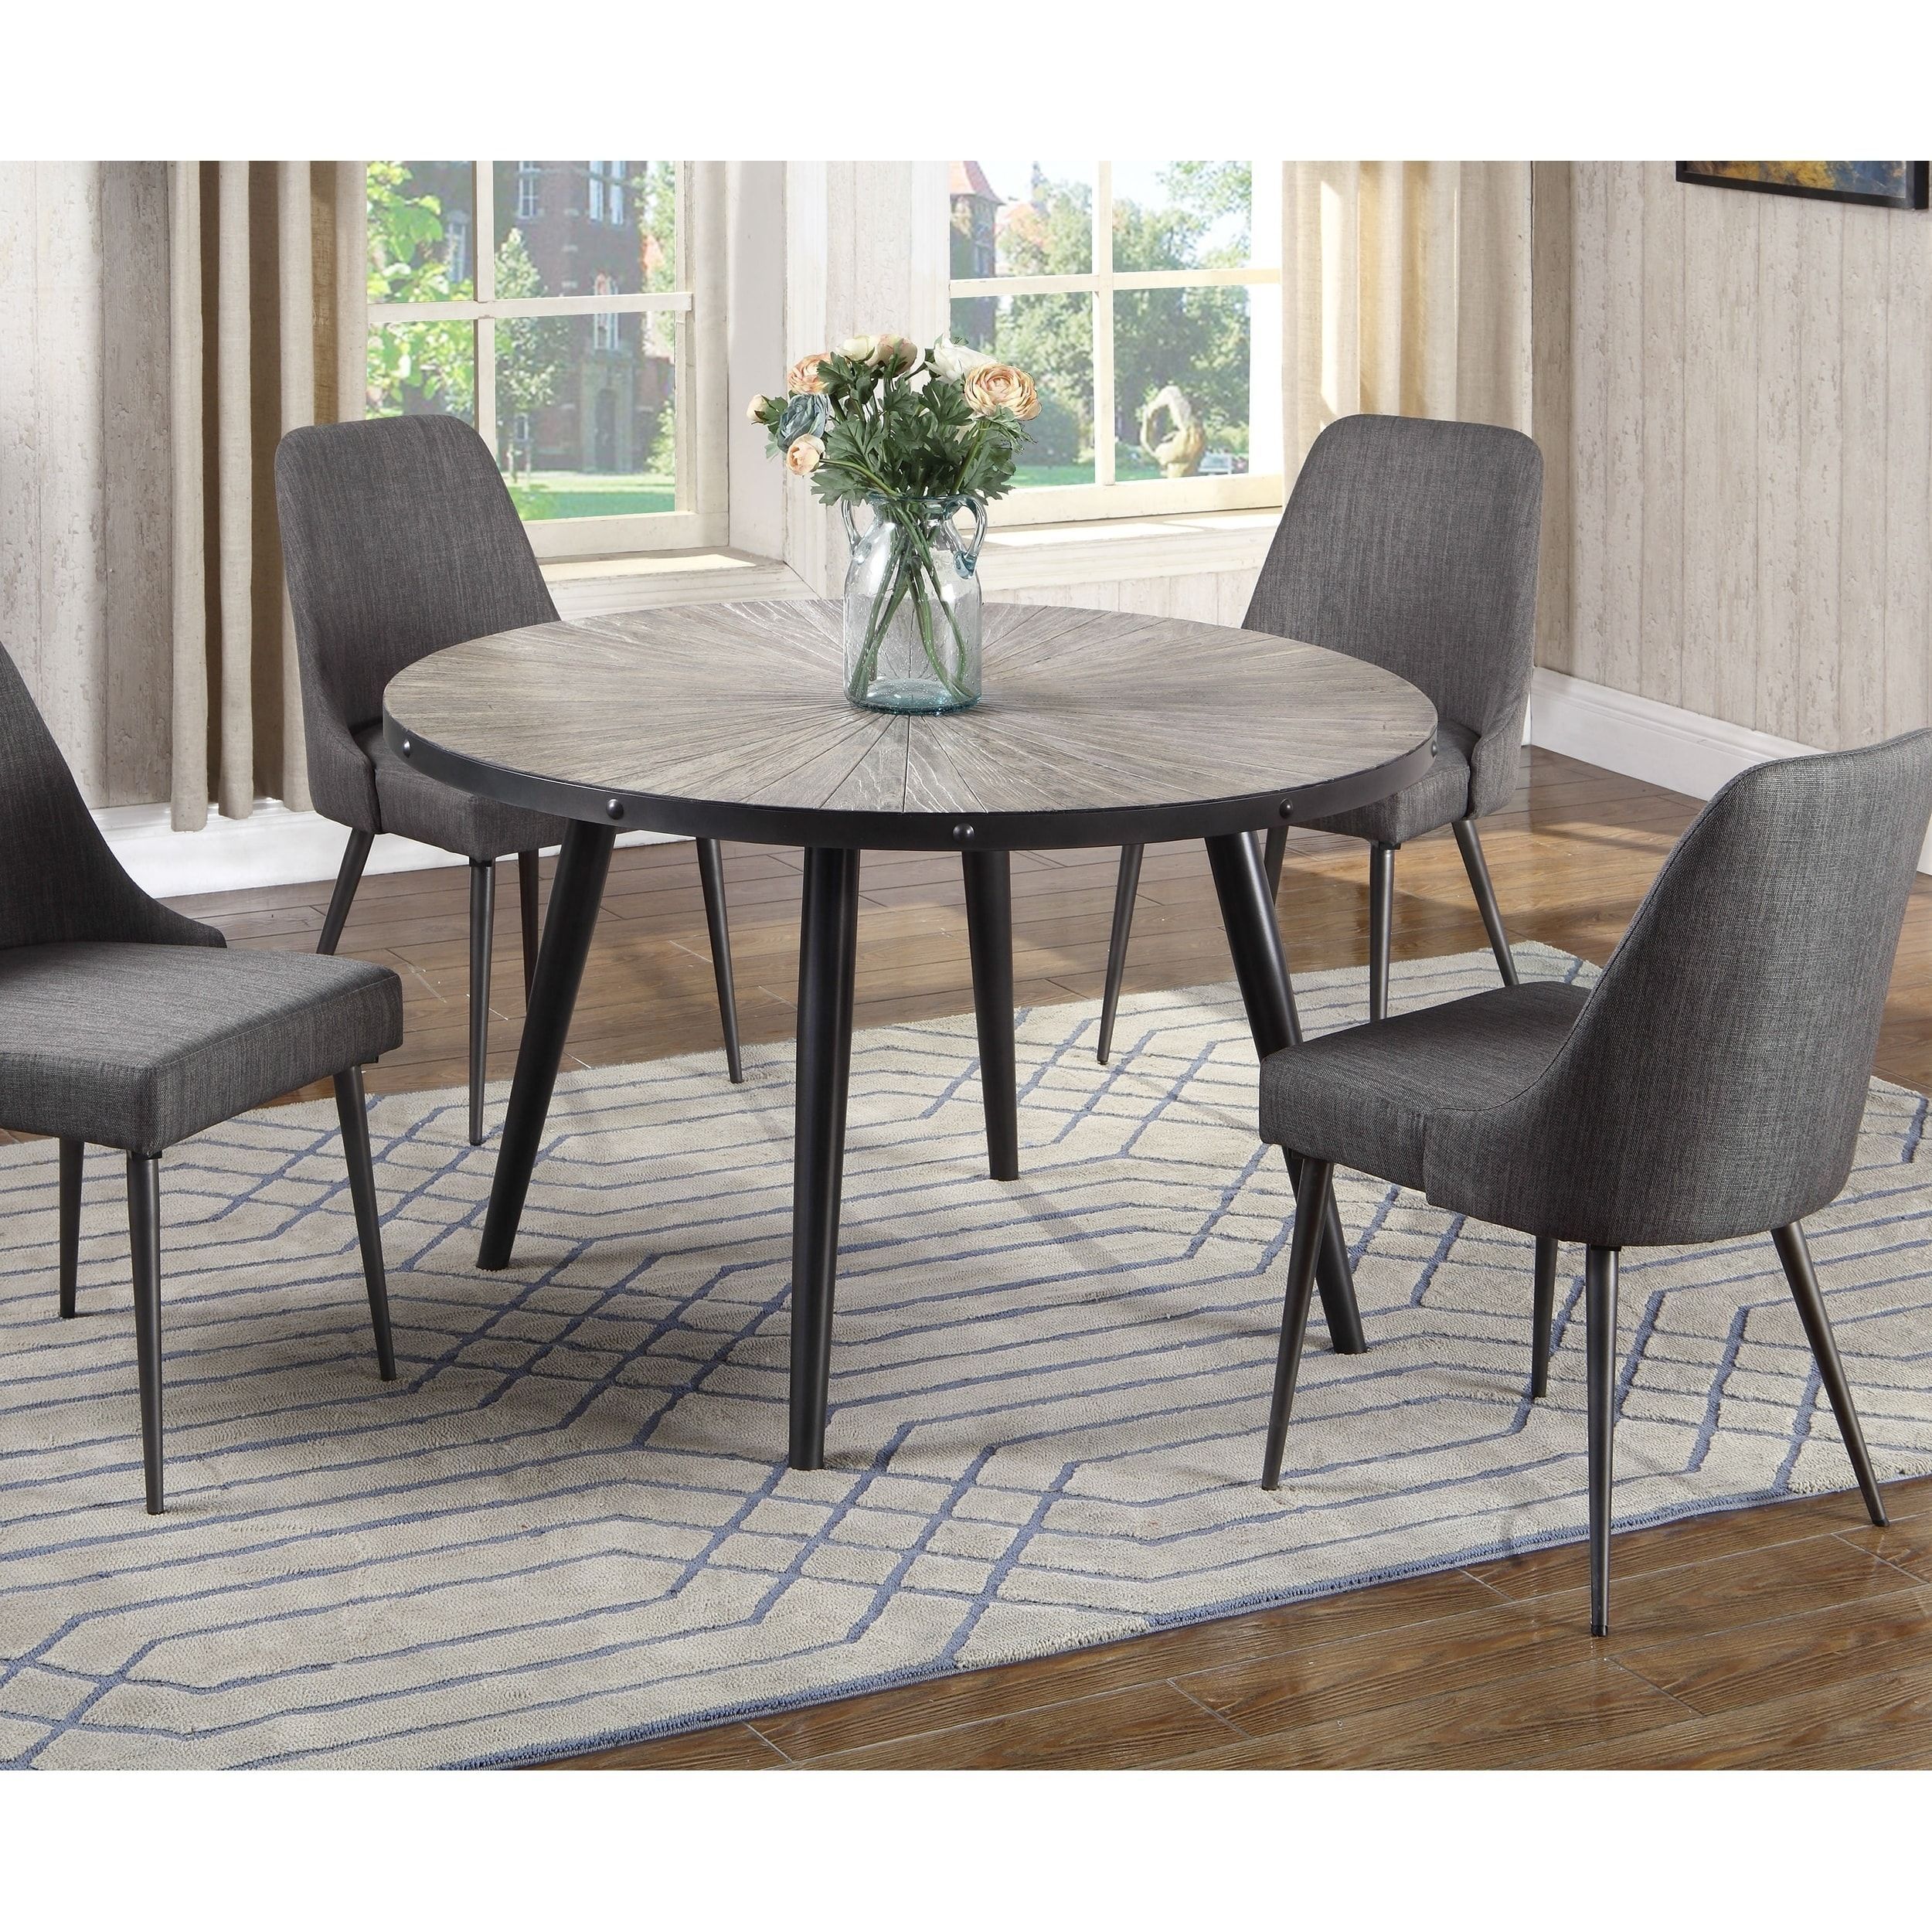 Best Master Furniture Urban Round Dining Table | Casual Pertaining To Current Montalvo Round Dining Tables (View 11 of 25)